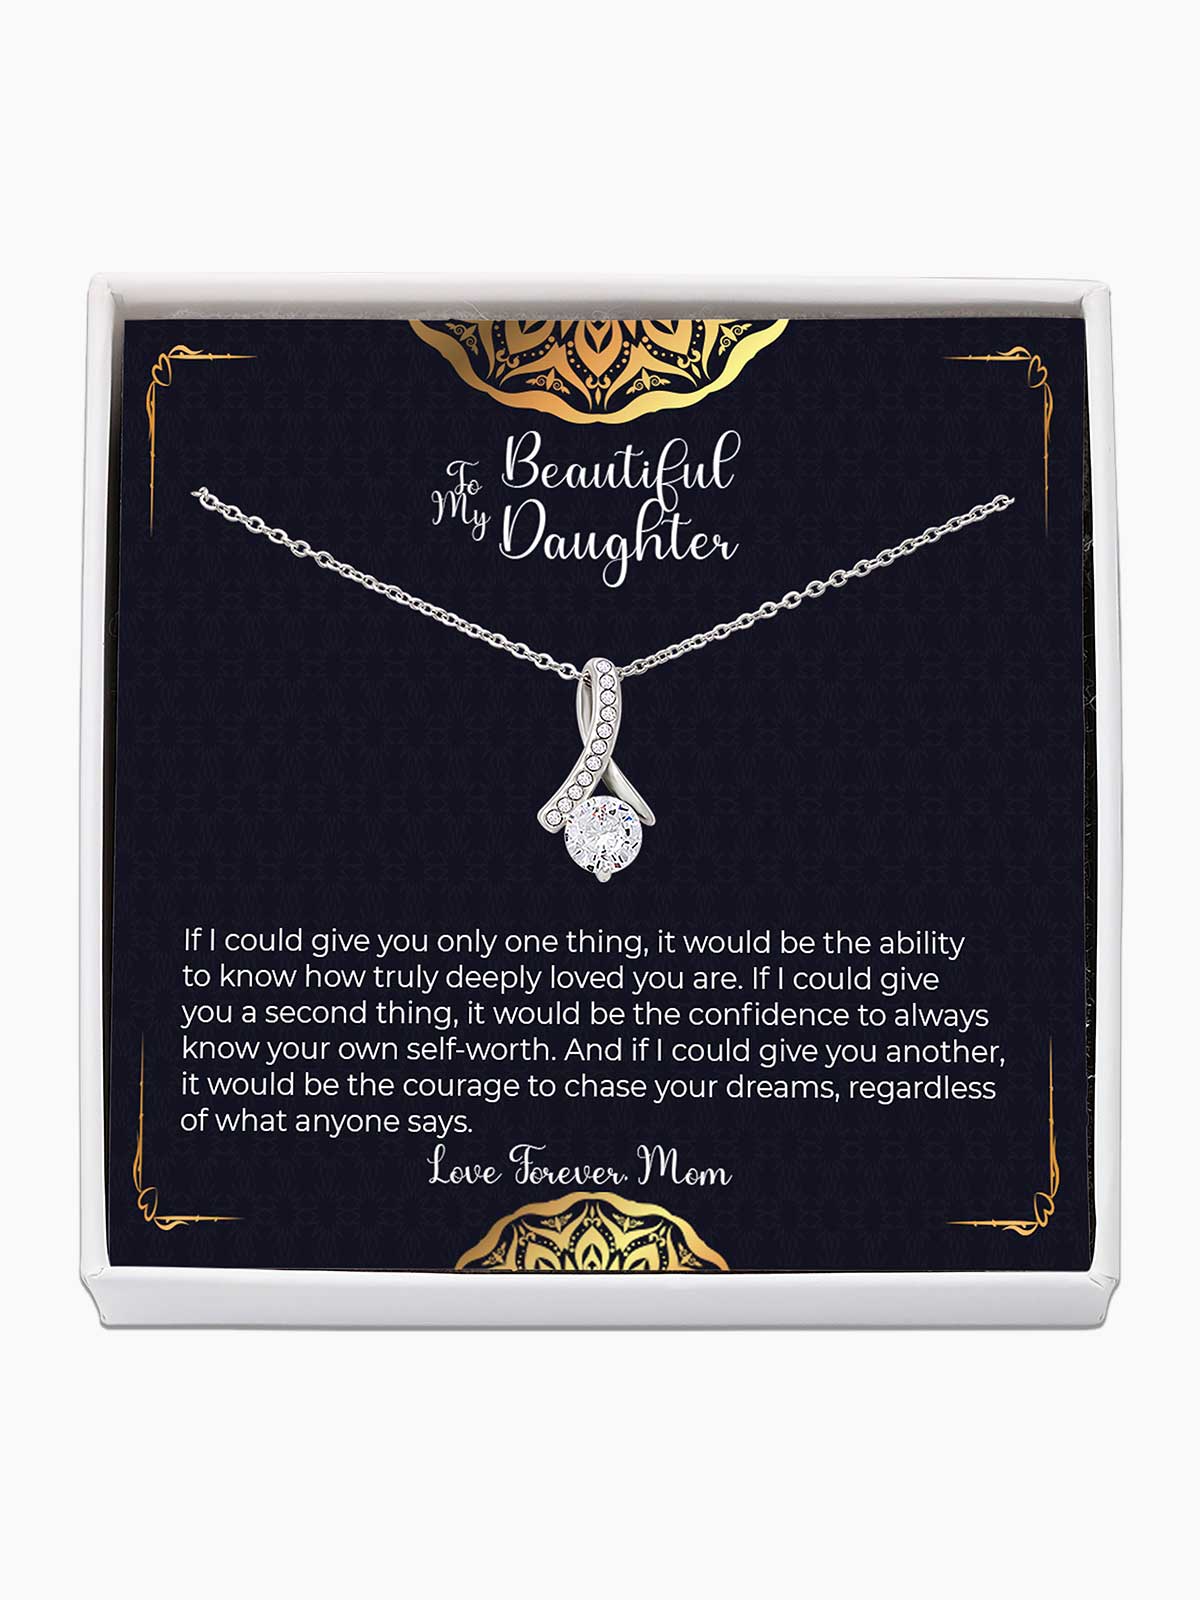 To Daughter - 'If I could give you 3 things' - Alluring Beauty Necklace